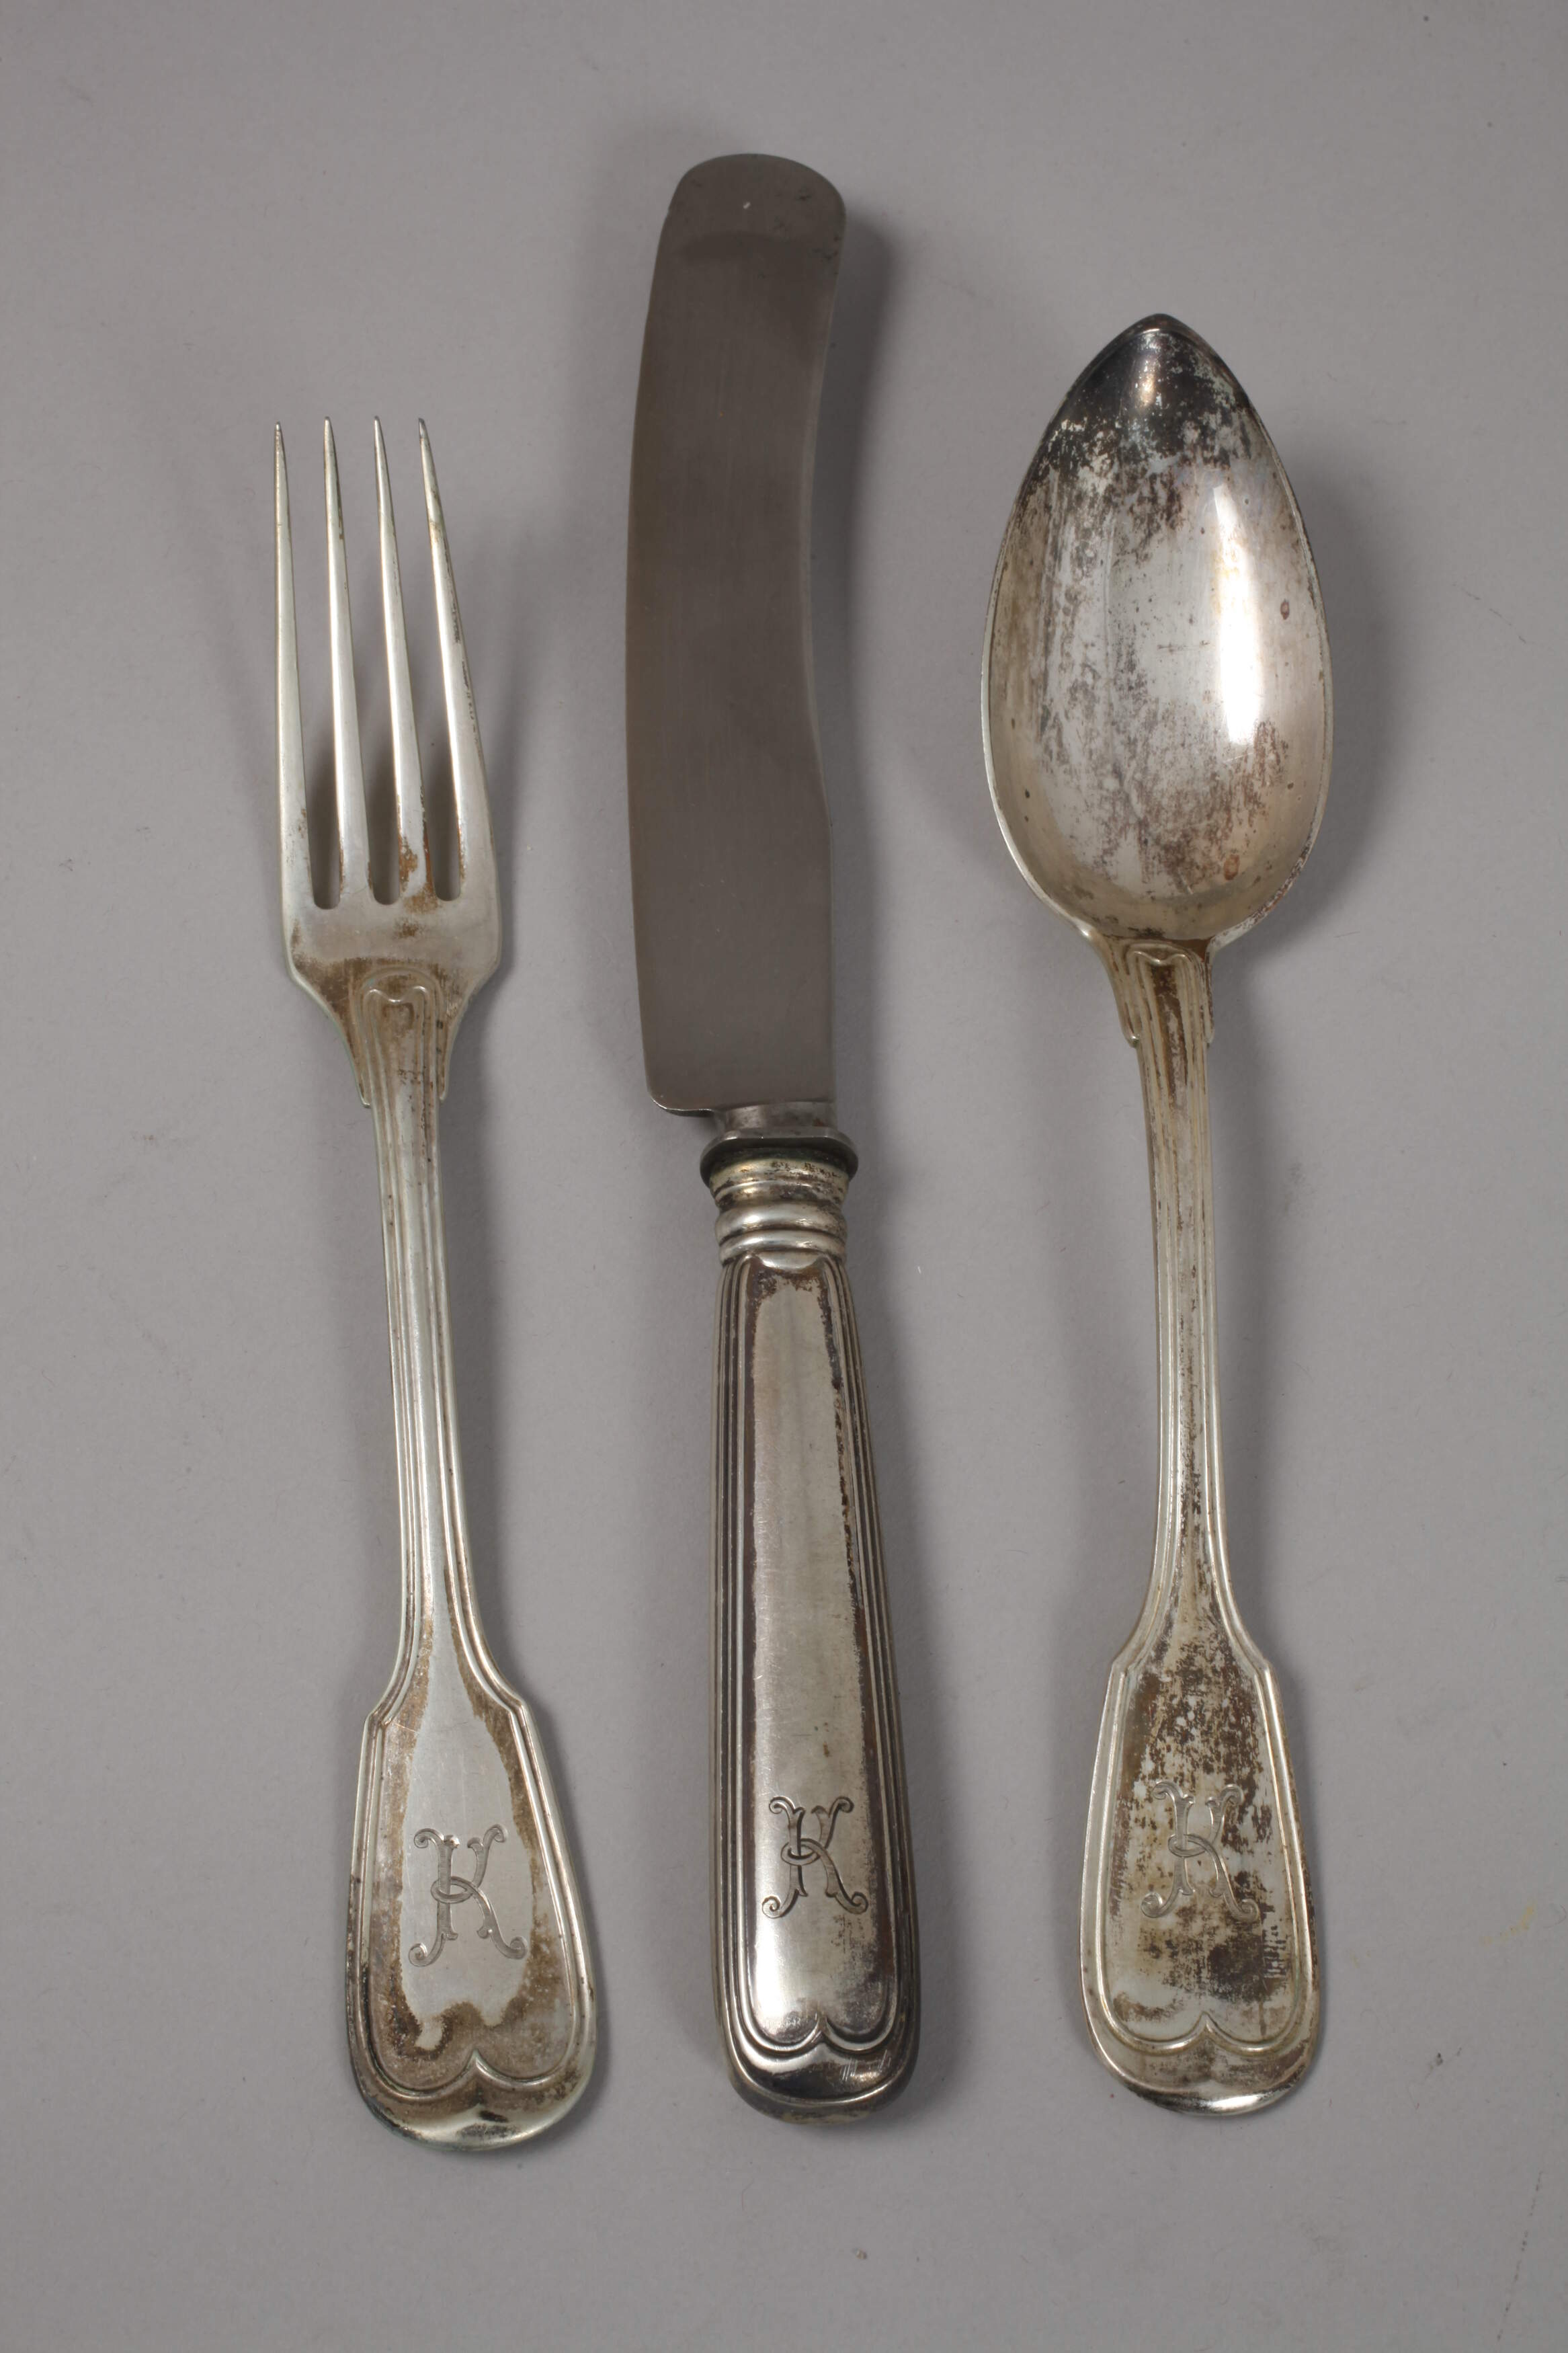 Silver oversized cutlery set Augsburger Faden - Image 2 of 9